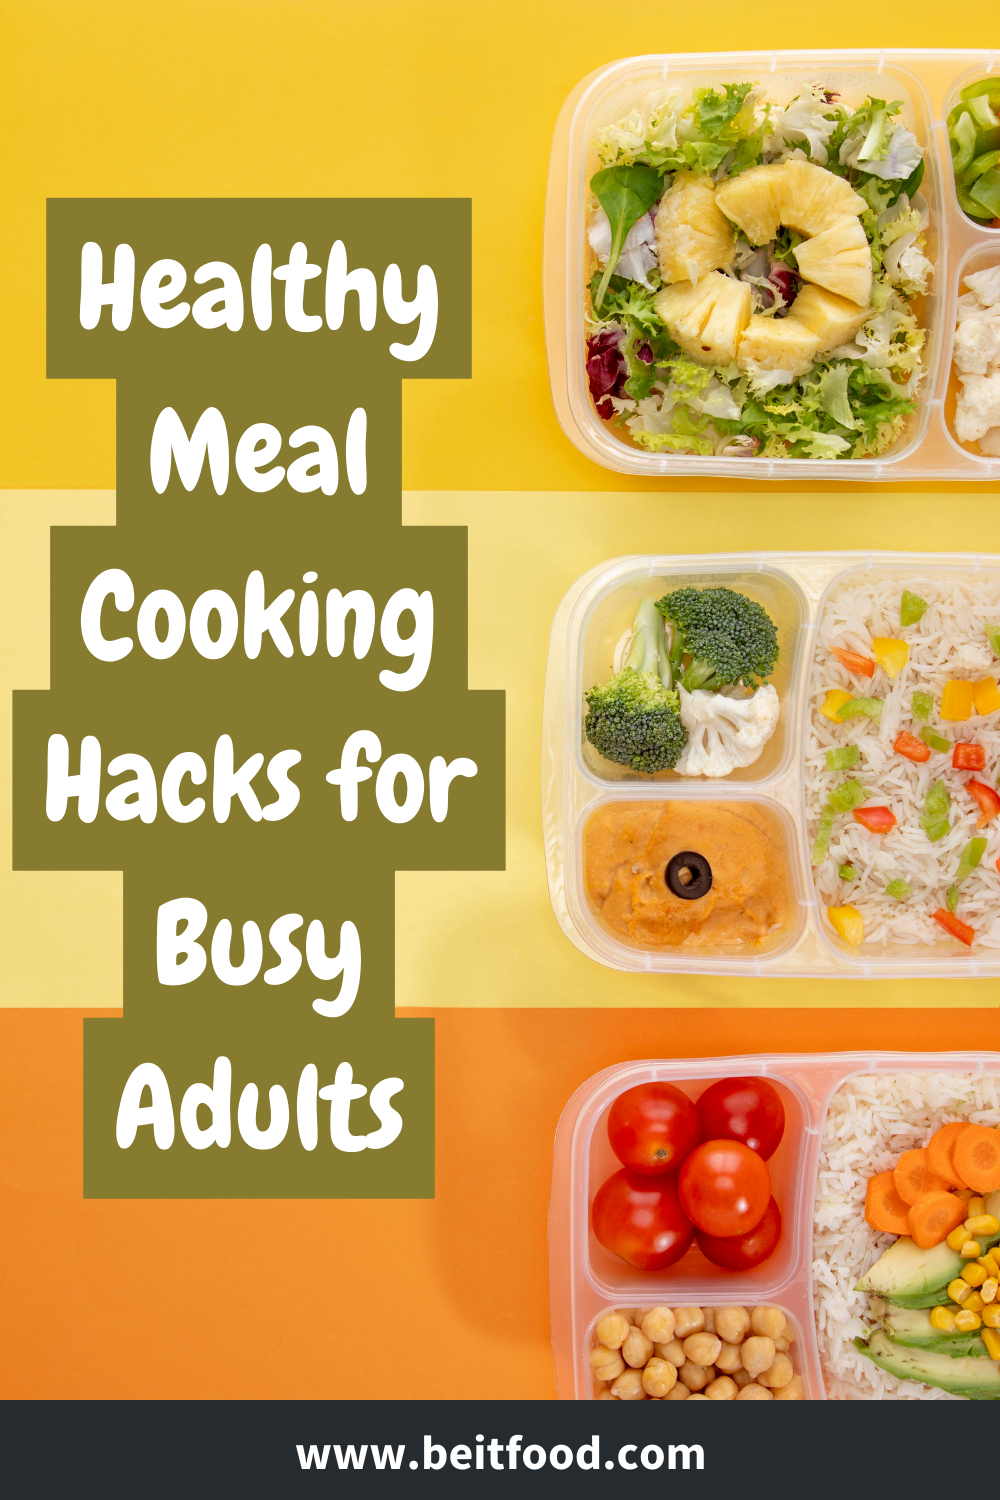 Healthy Meal Cooking Hacks for Busy Adults